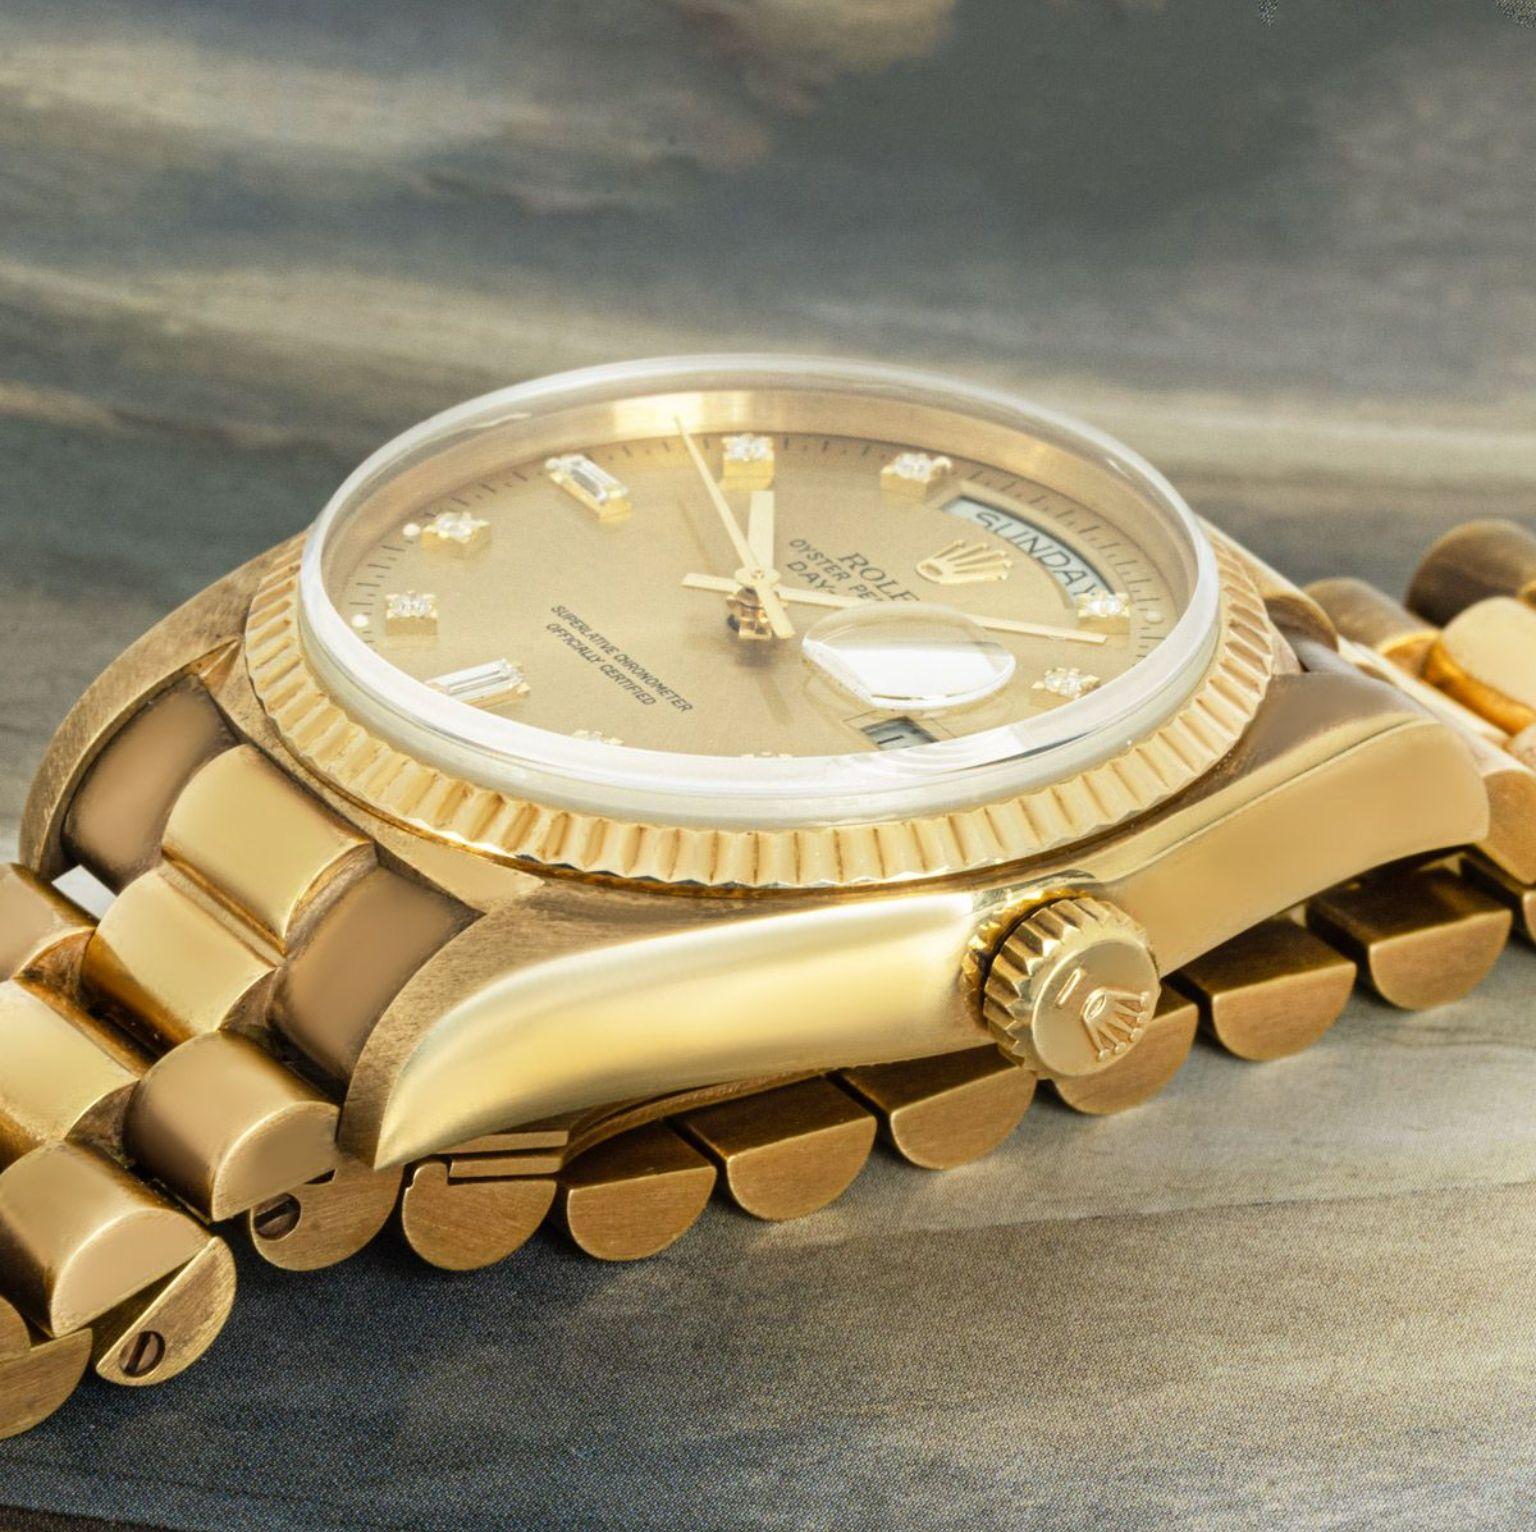 A yellow gold Day-Date by Rolex. Featuring a champagne dial set with 8 round brilliant cut diamonds as well as 2 baguette cut diamond hour markers and a fixed yellow gold fluted bezel.

Equipped with a yellow gold president bracelet and a concealed